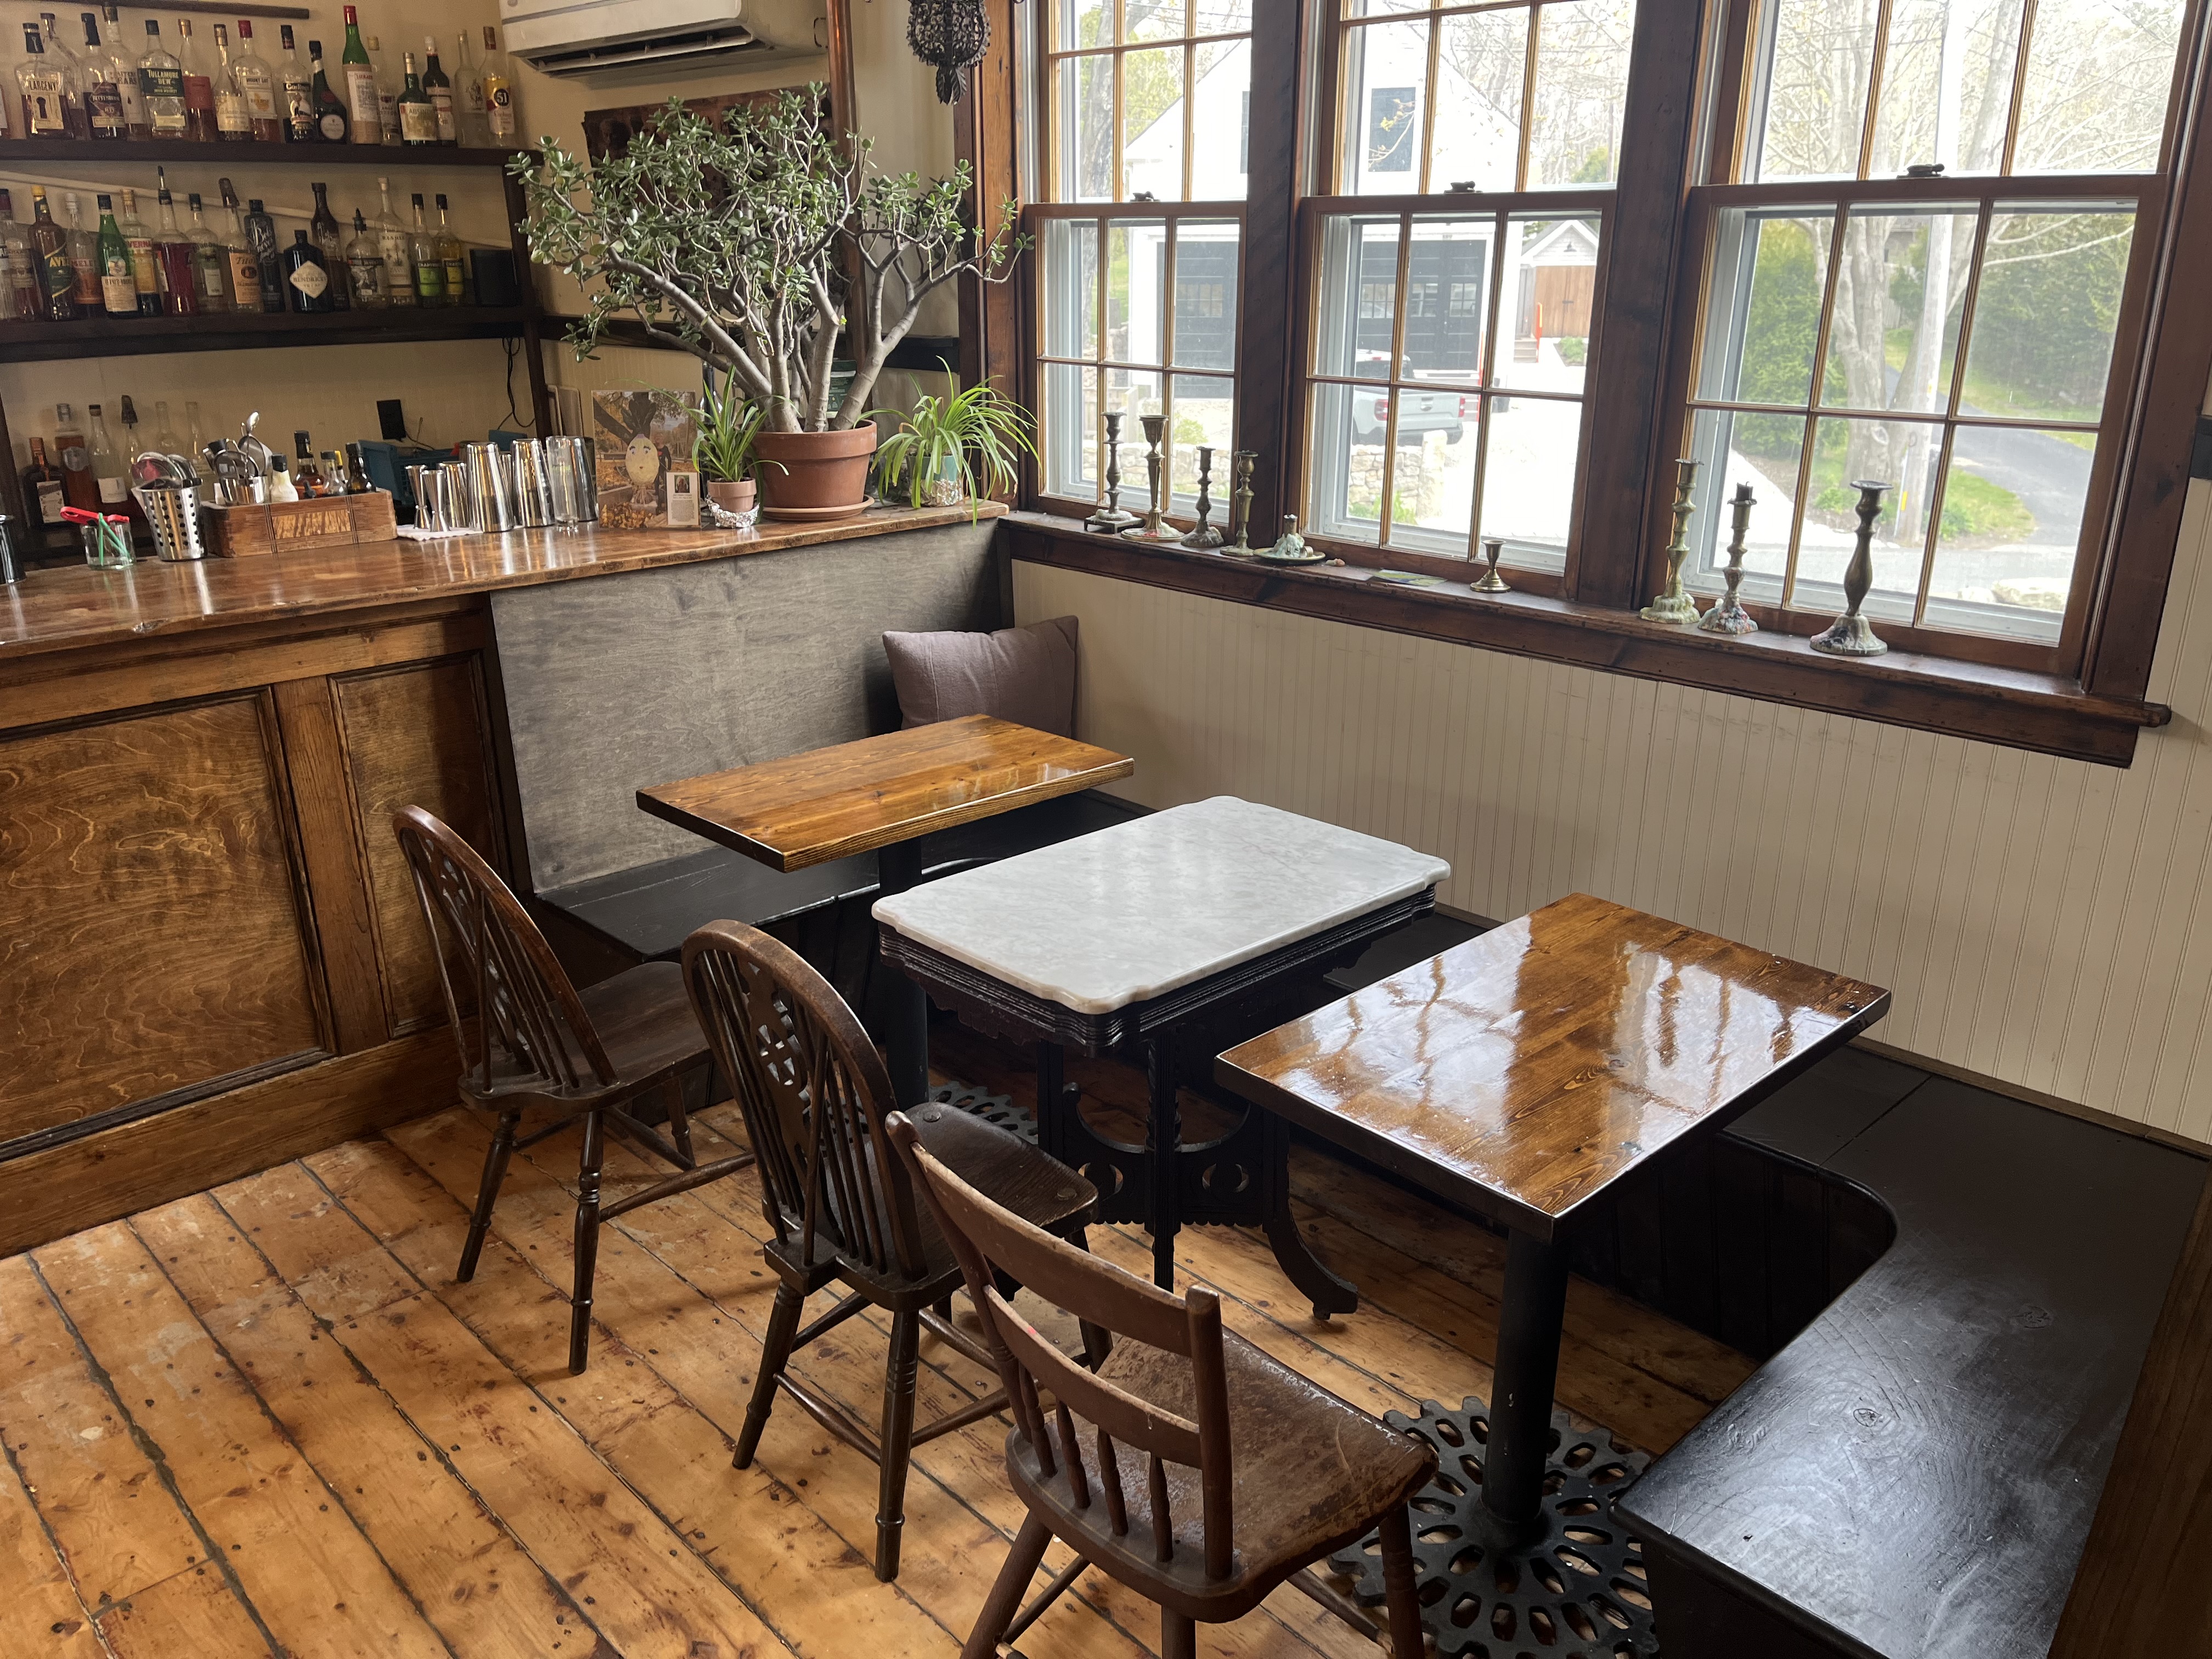 custom wood tables in a pub/cafe